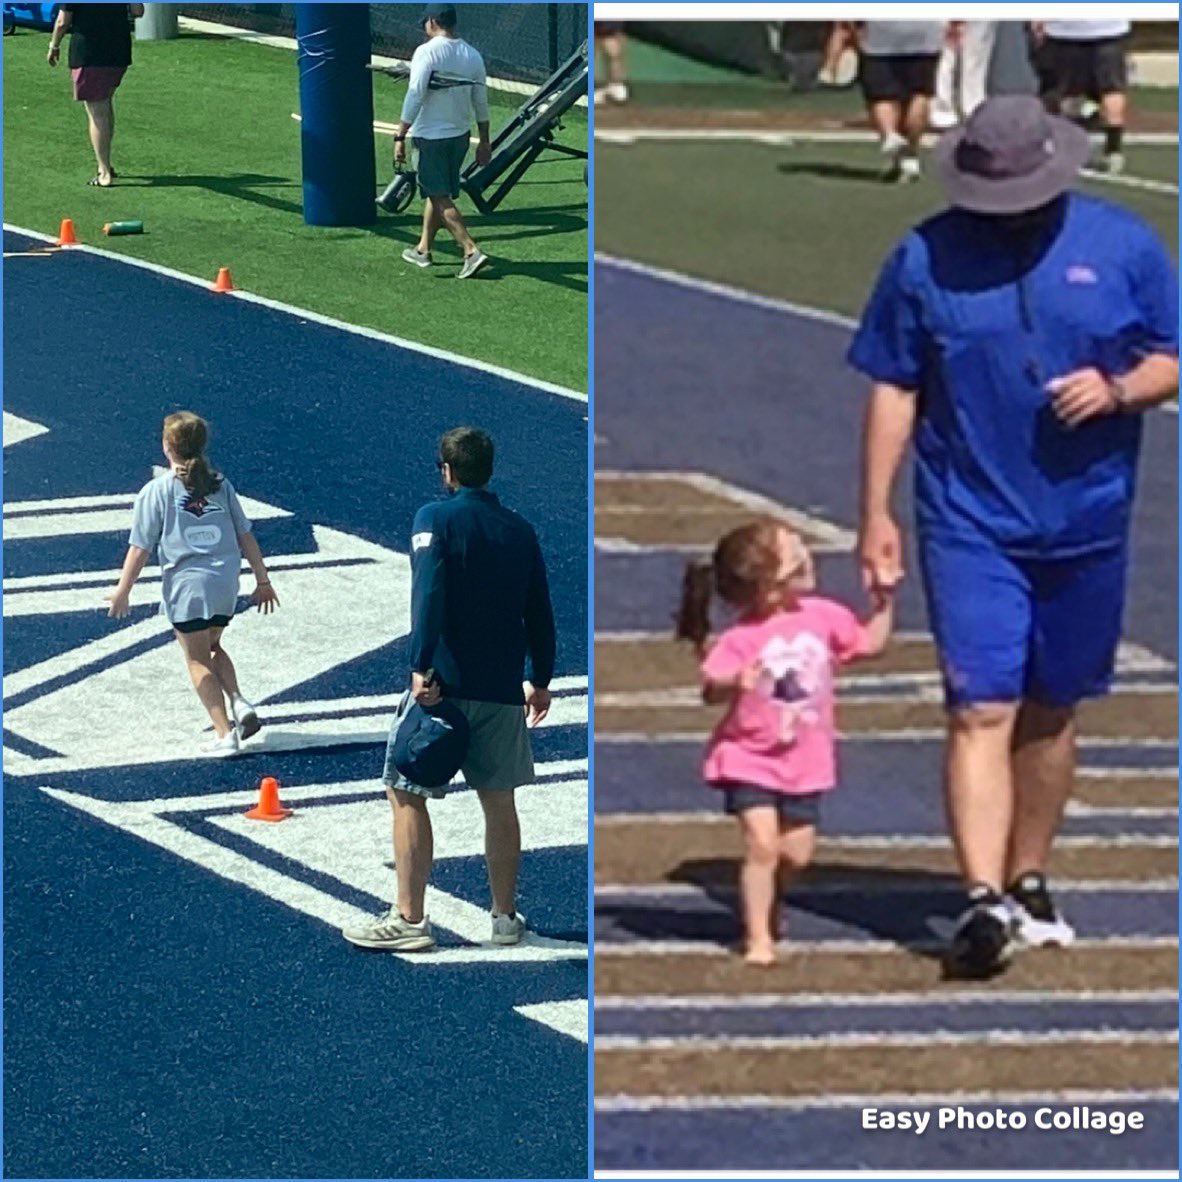 Babies don’t keep. Kirby and @OLCoachMattox at summer camps. 2022 vs 2015. #Slowdowntime